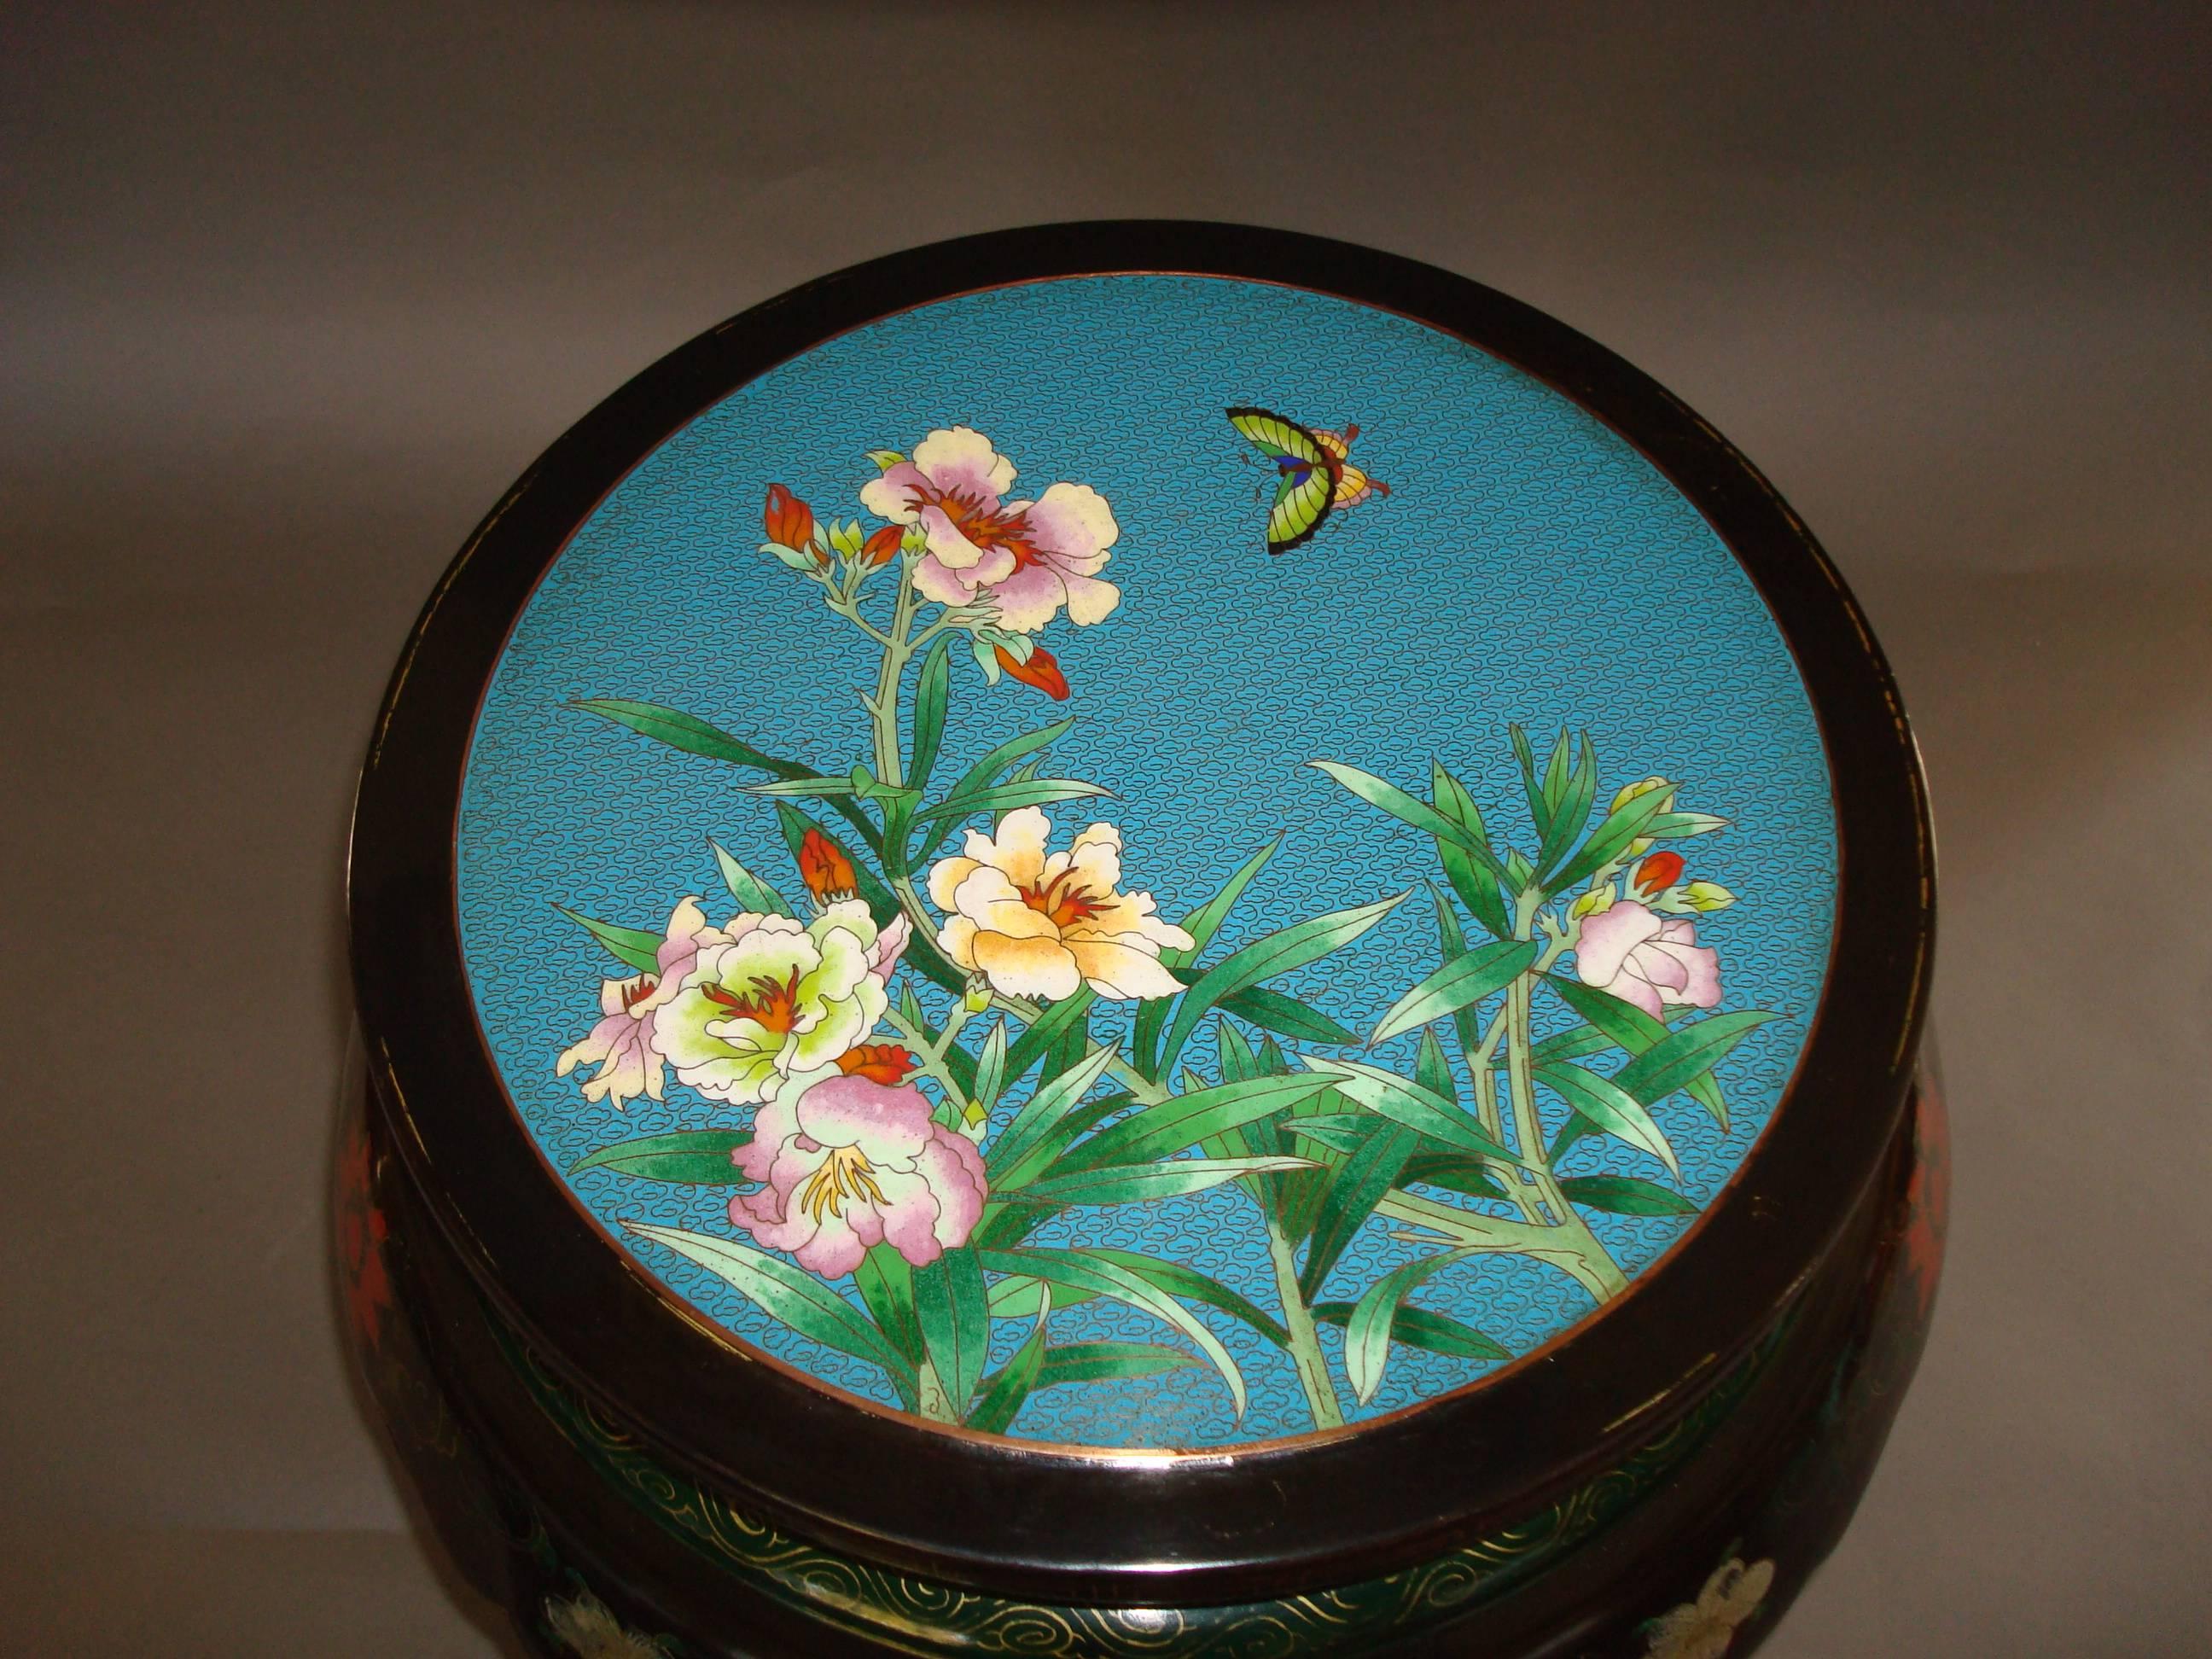 A pair of Chinese lacquered and cloisonné low tables; the circular tops inset with colourful cloisonne enamelled panels, one with a spray of flowers and a butterfly, the other with a vase of flowers and Chinese objects.  The moulded edge with gilt